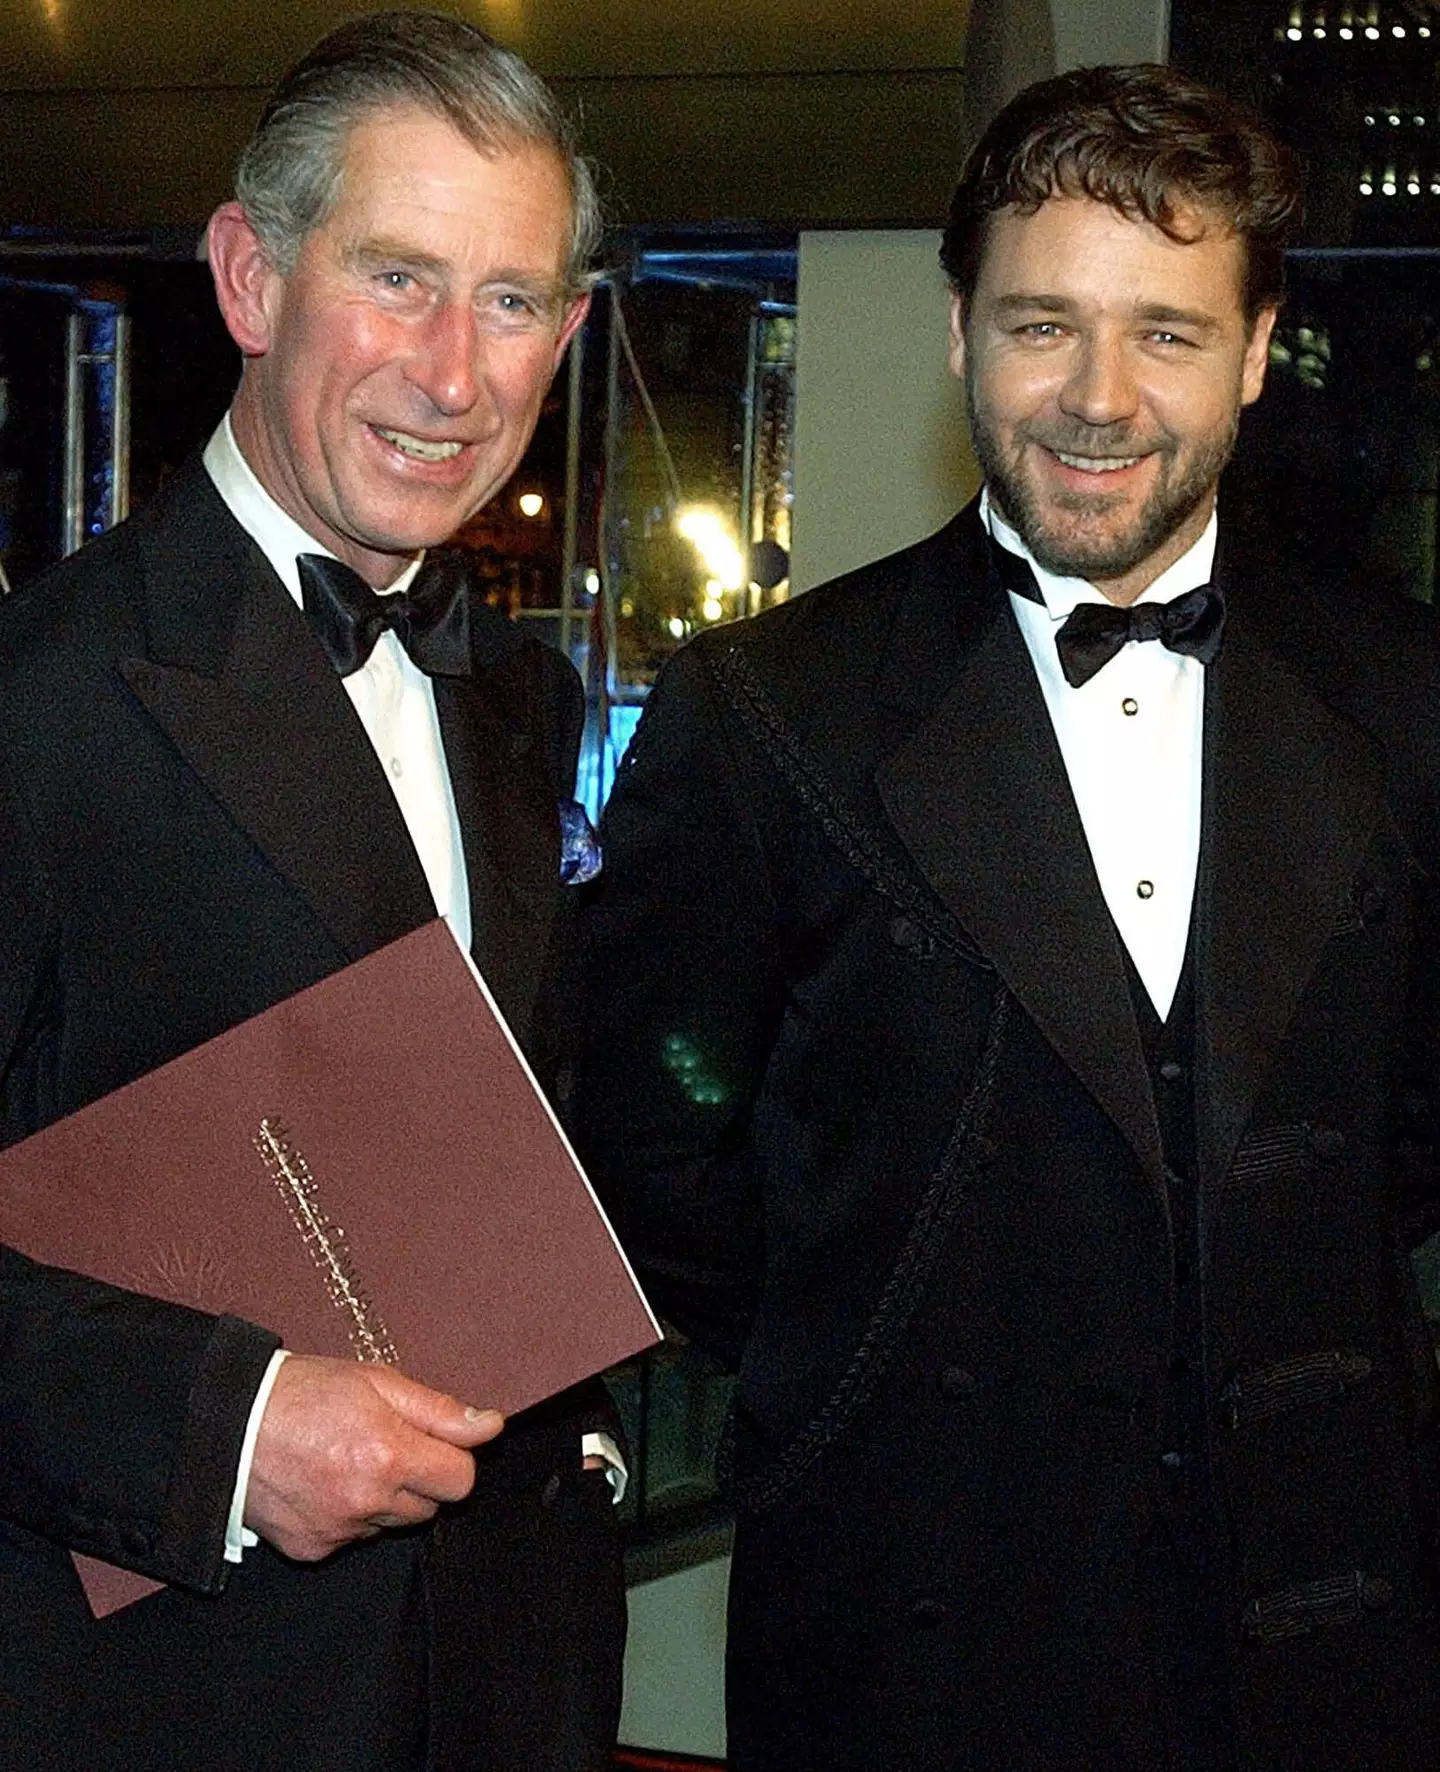 Both Russell and Charles at the Master and Commander premiere in London back in 2003.